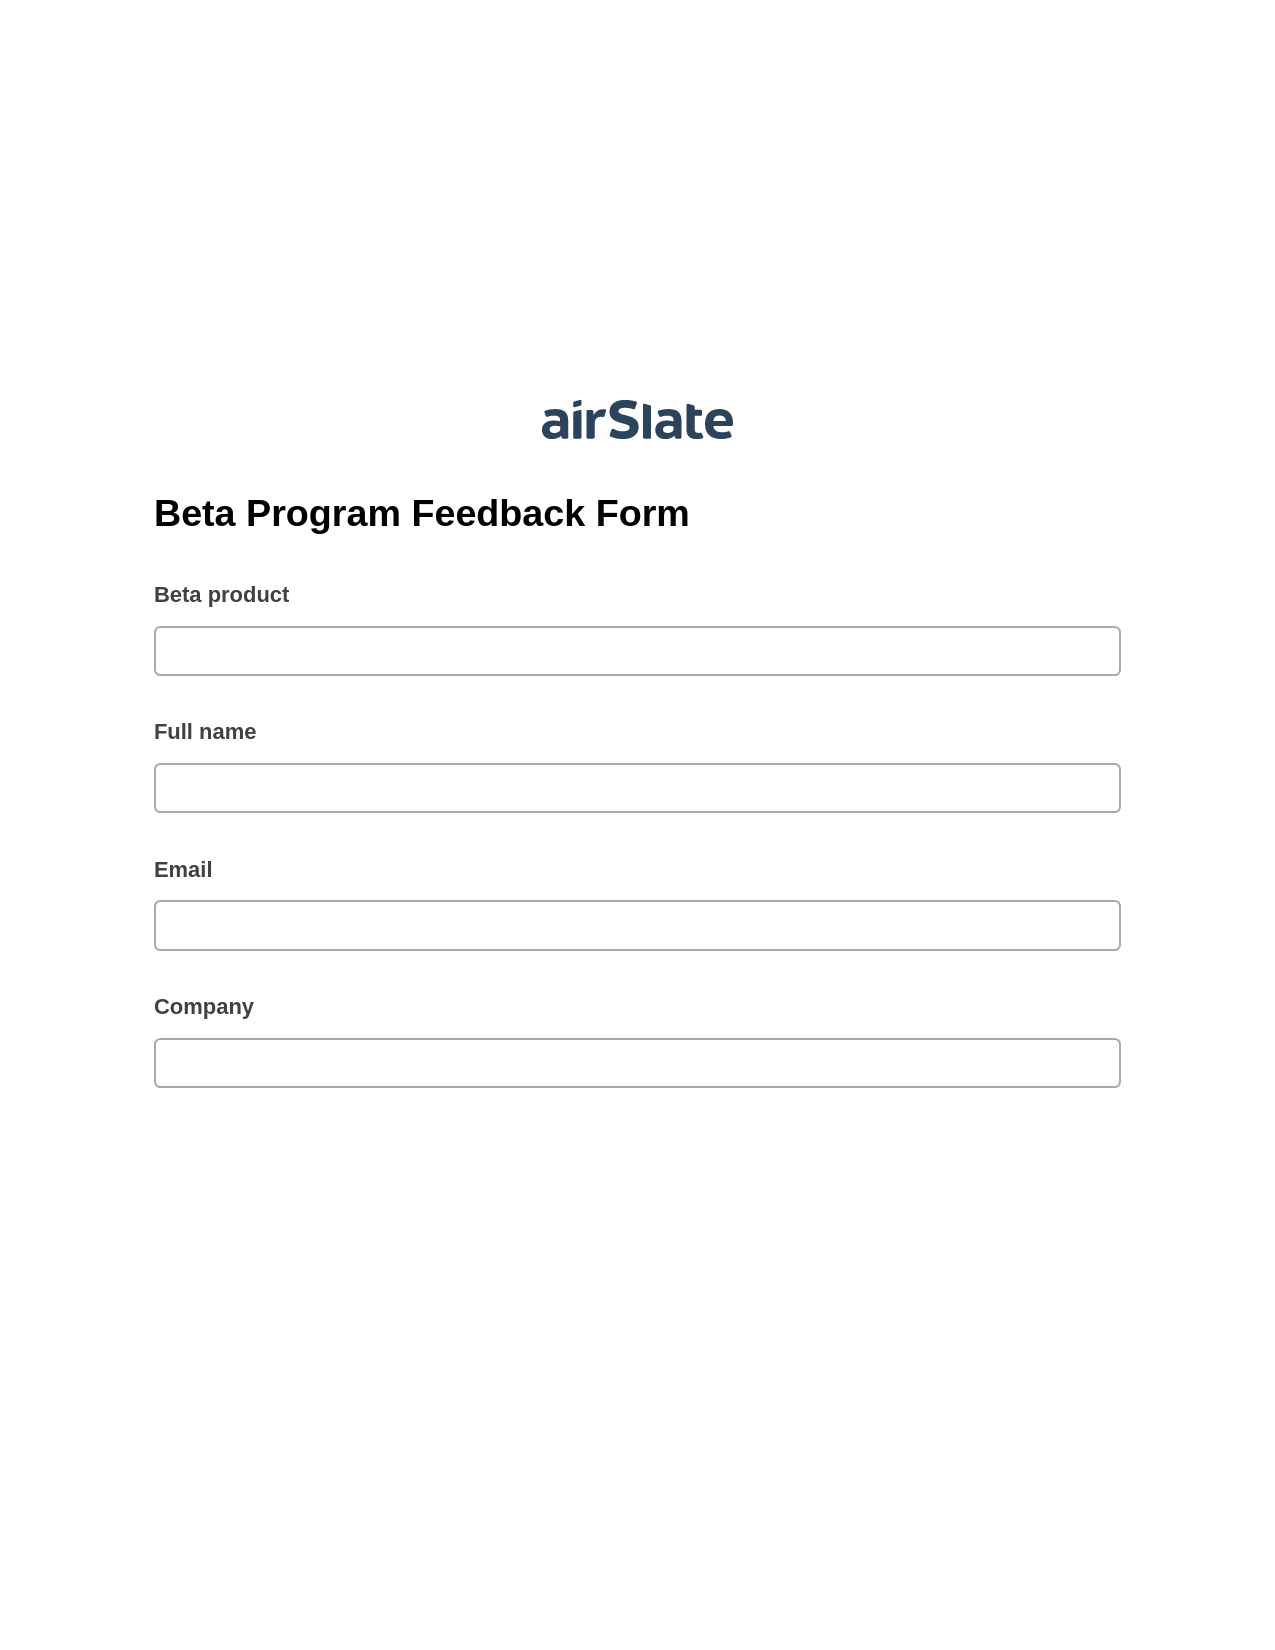 Beta Program Feedback Form Pre-fill Slate from MS Dynamics 365 Records Bot, Roles Reminder Bot, Post-finish Document Bot